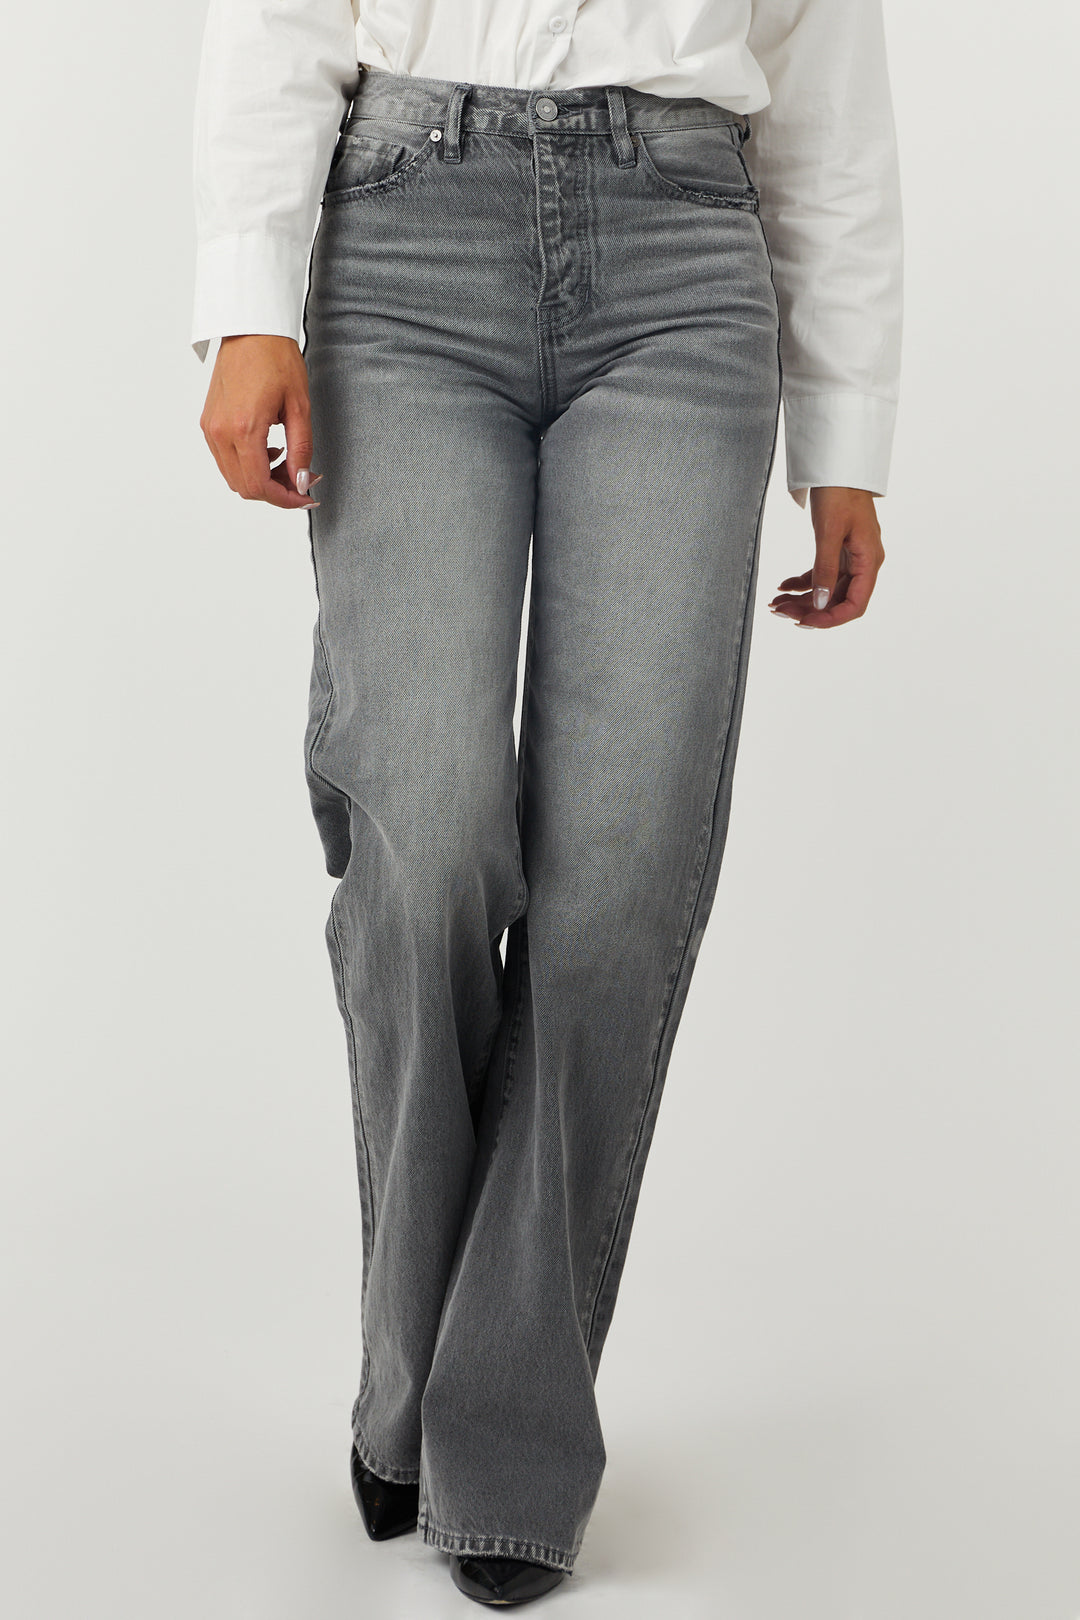 KanCan Washed Stone Grey High Rise 90's Flare Jeans & Lime Lush